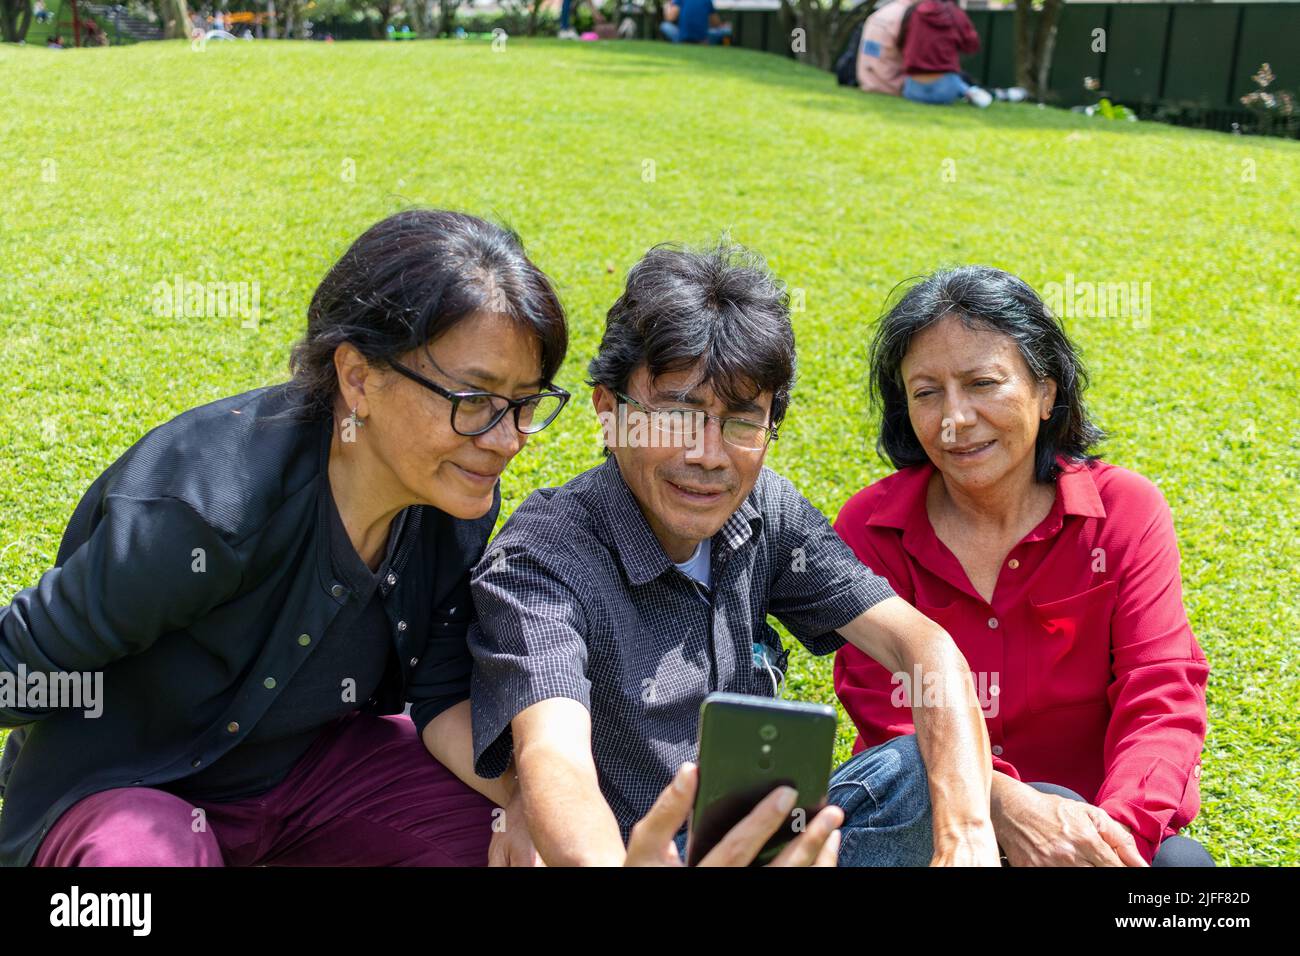 Group of middle aged latin friends taking a selfie and having fun in a park Stock Photo